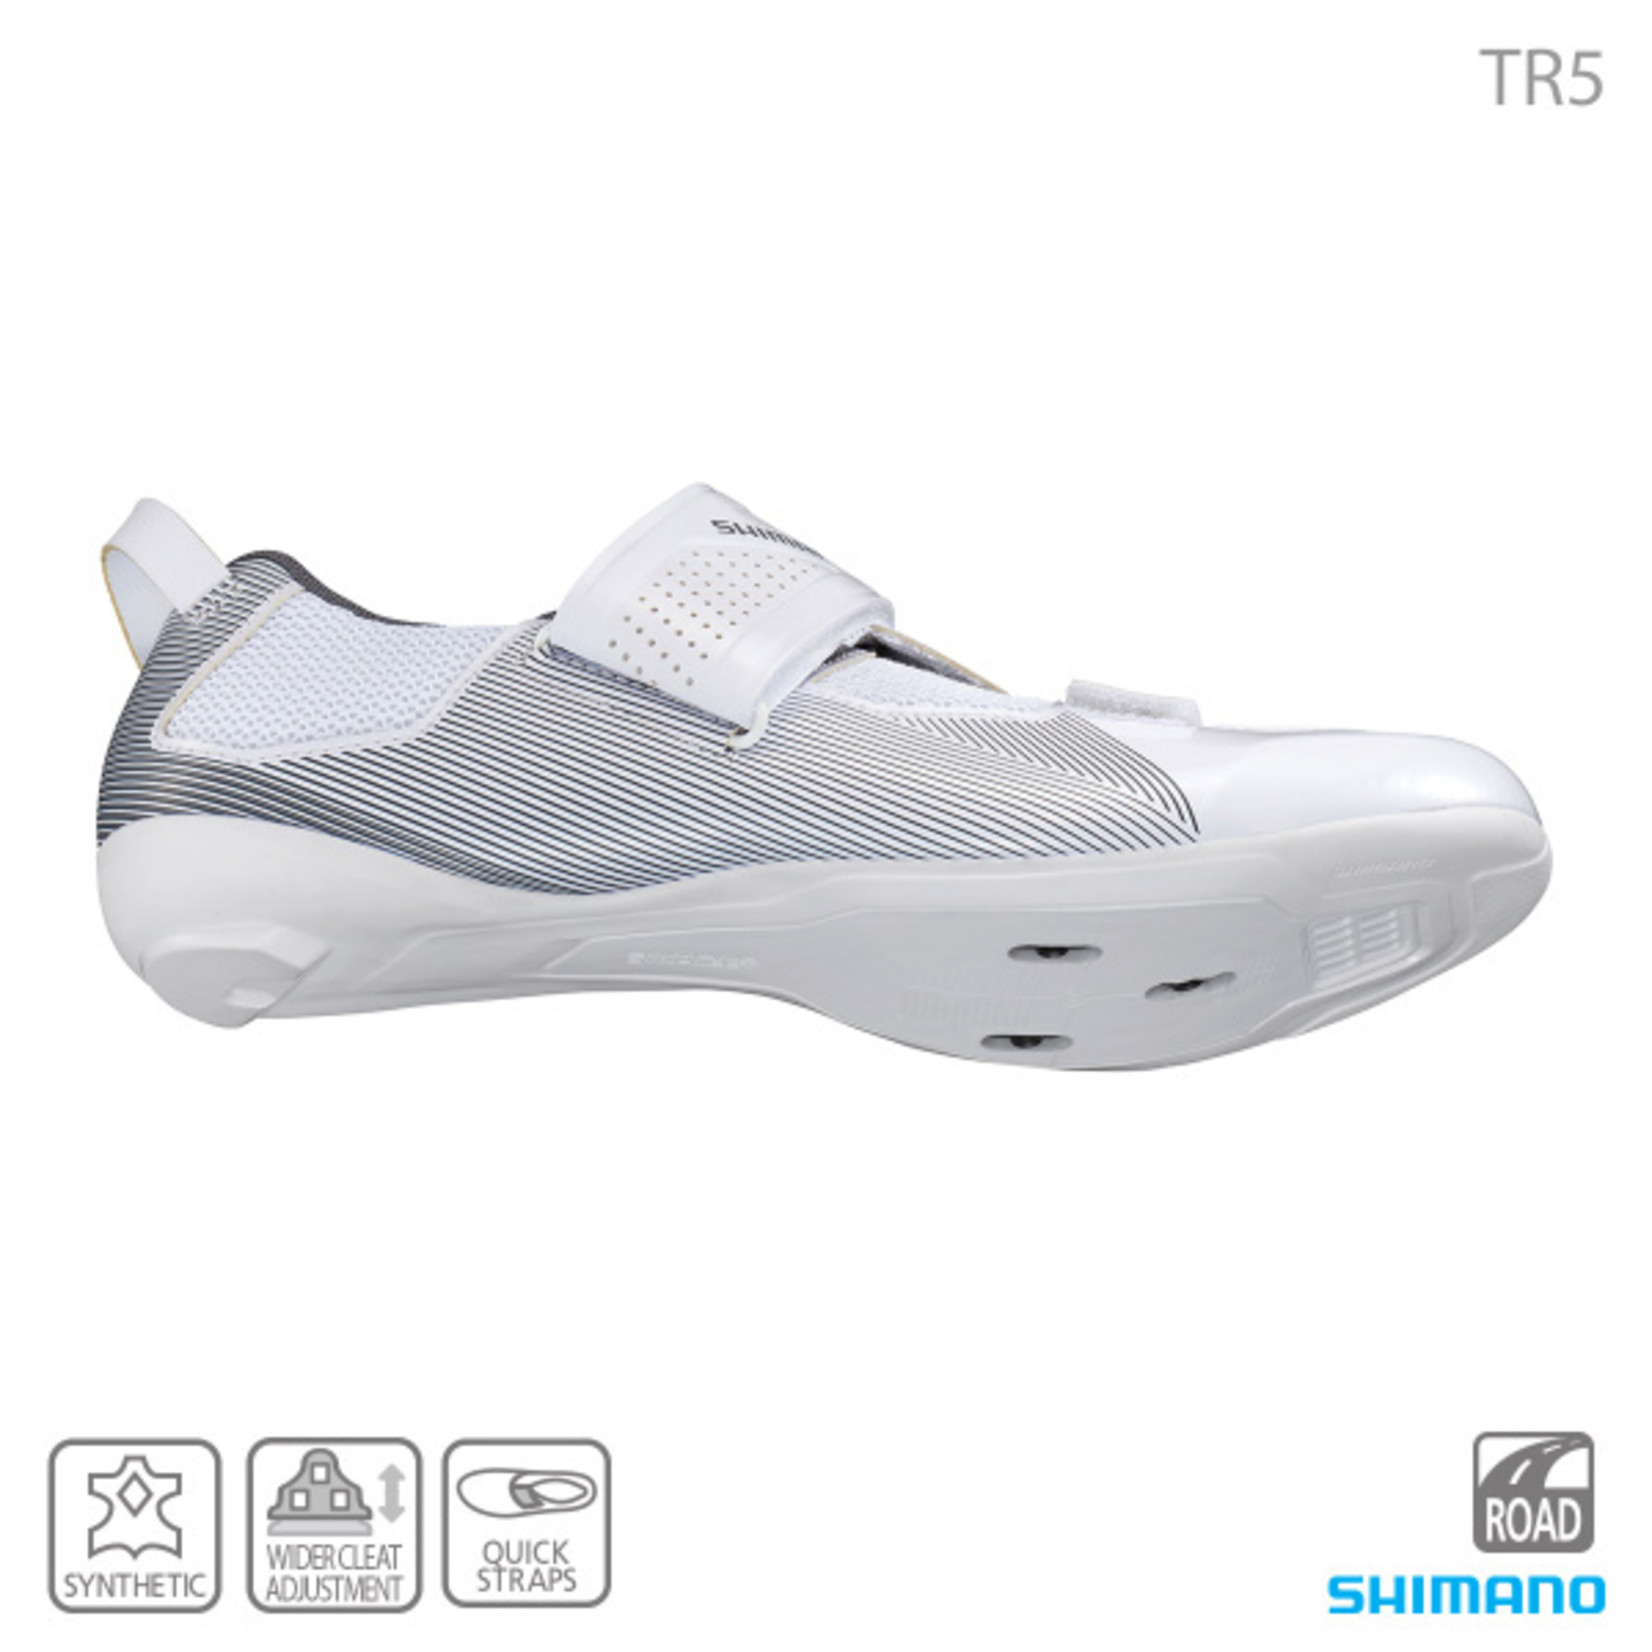 Shimano Shimano Sh-TR501 Triathlon Shoes - White Advanced Fit And Performance Technology